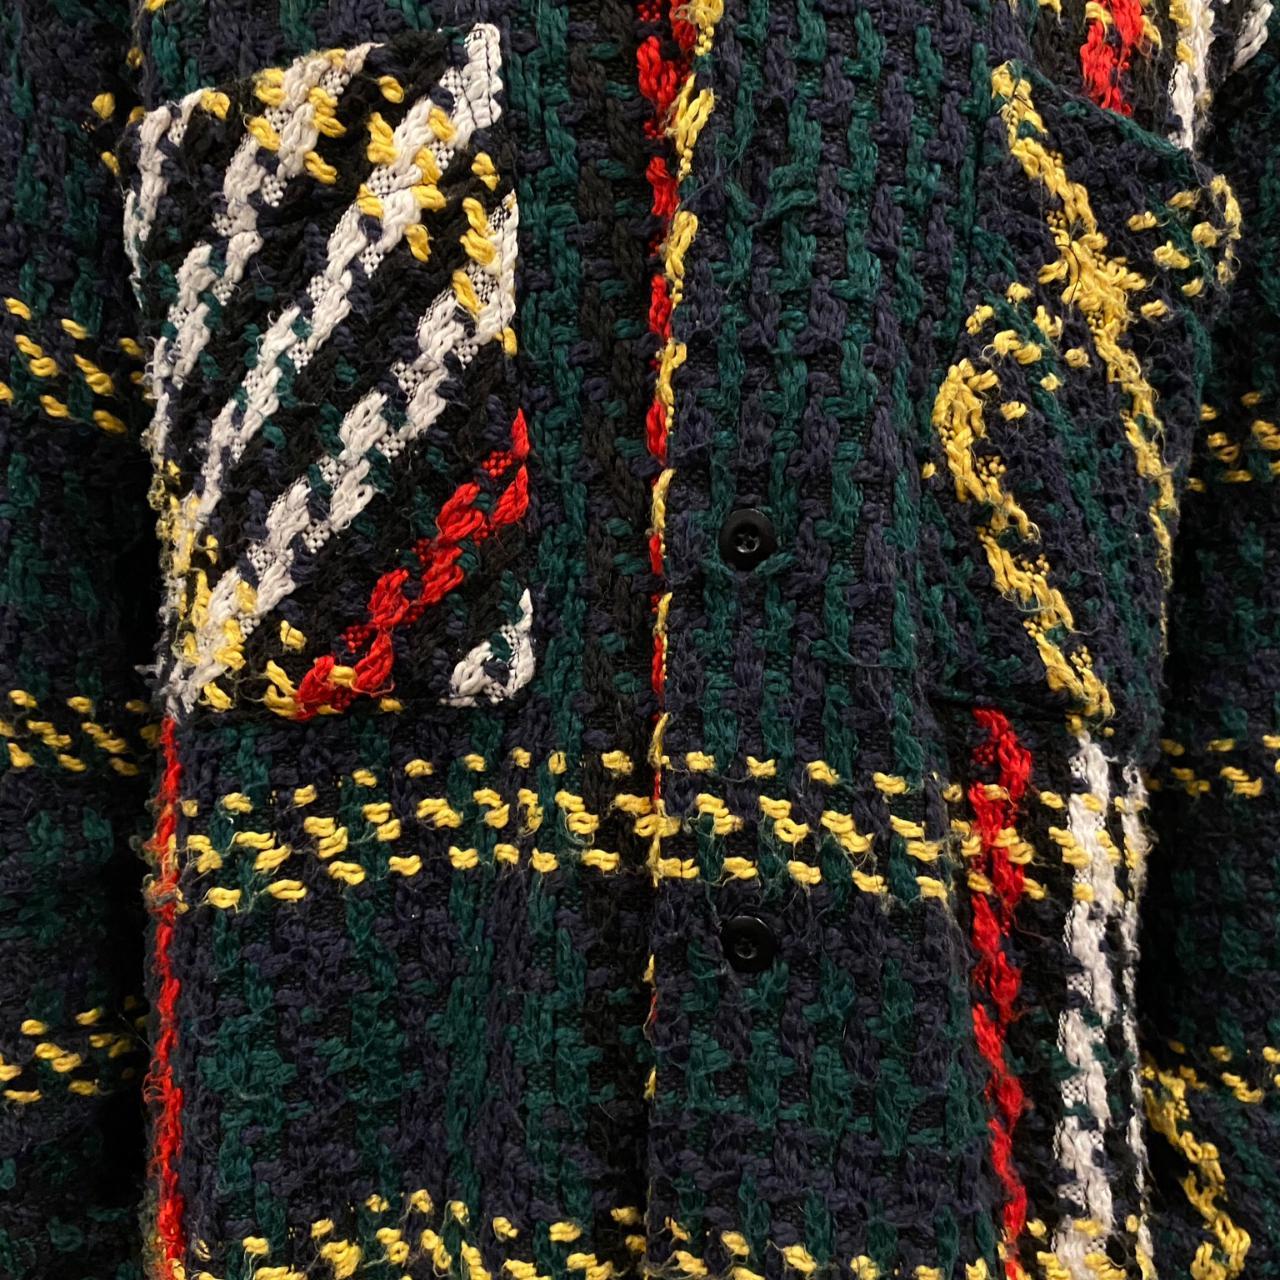 Product Image 4 - Lifted Anchors Woven Patterned Jacket.
Get